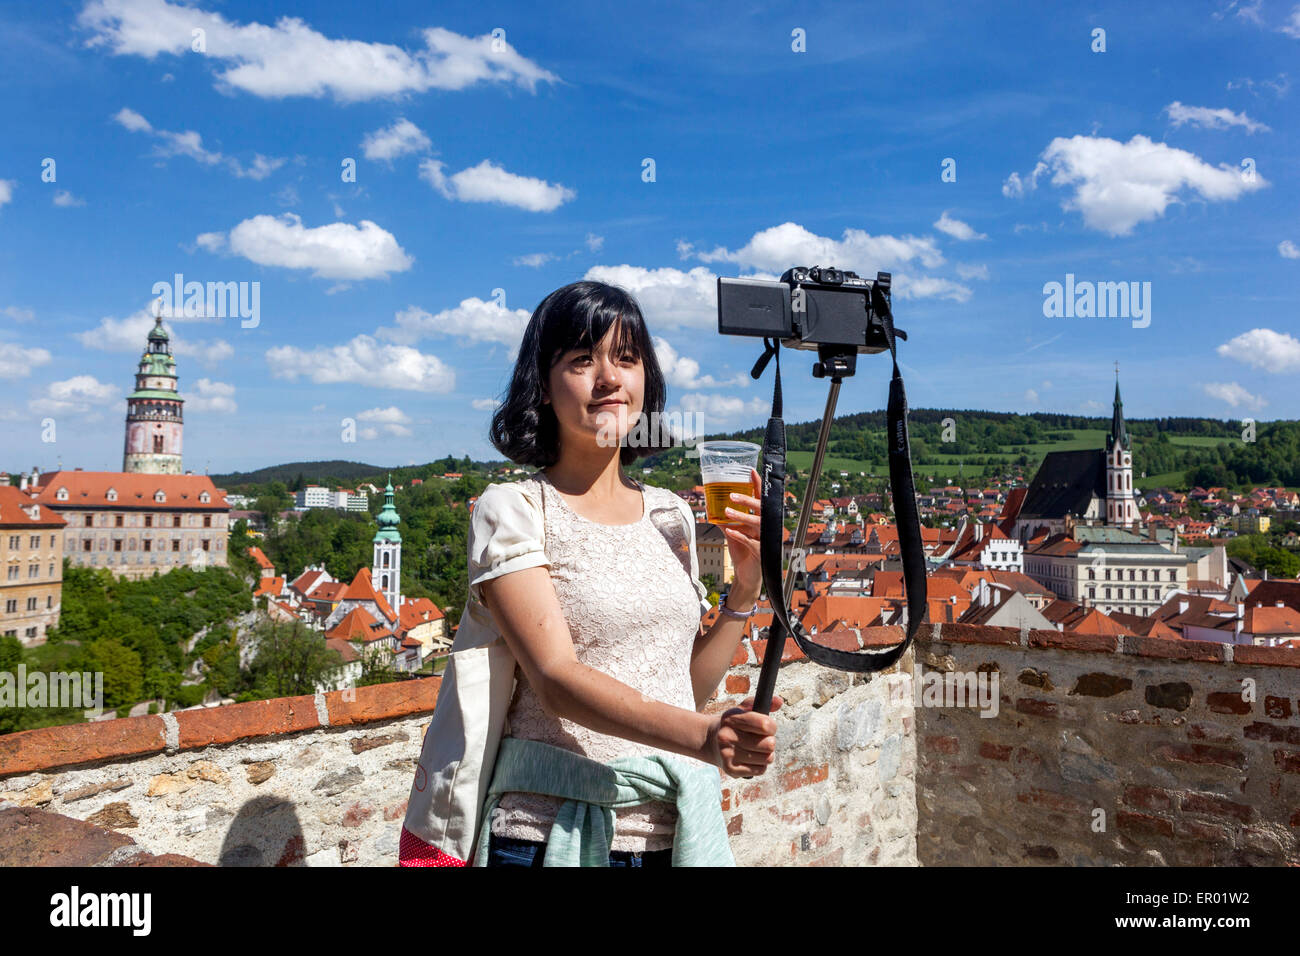 Young woman drinking beer, taking selfie on camera with plastic cup Cesky Krumlov Czech Republic Europe Stock Photo